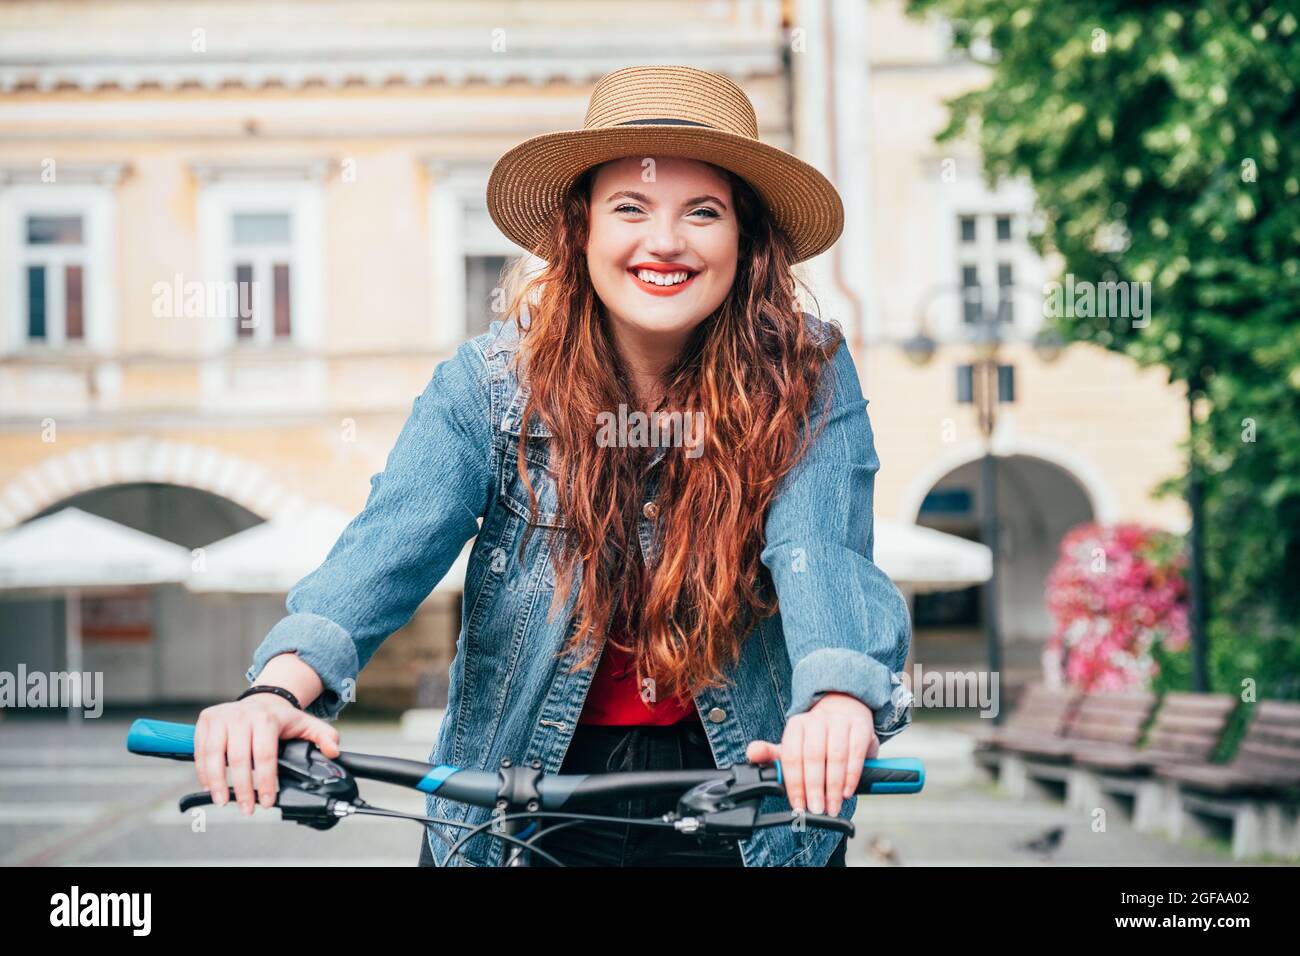 Portrait of smiling long red curly hair caucasian teen girl in a straw hat riding a vintage bicycle in the old town center. Eco transport sharing or c Stock Photo